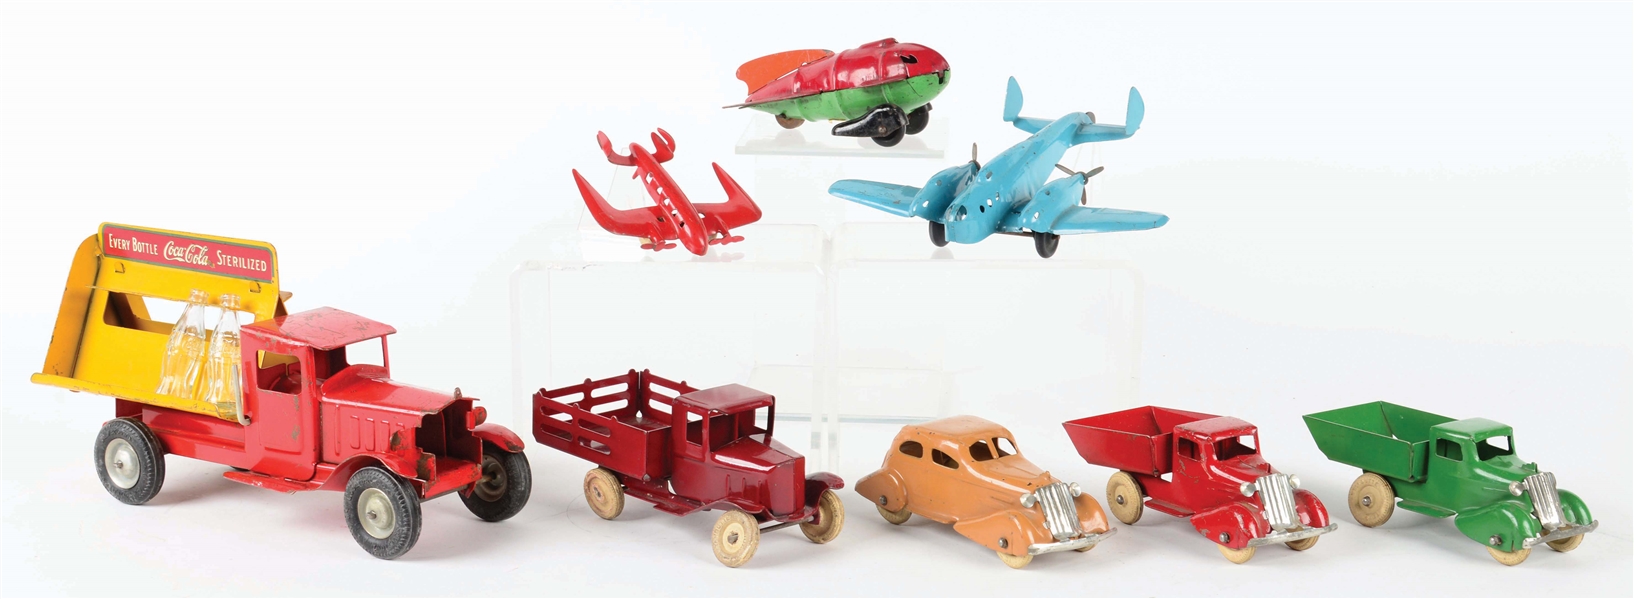 LOT OF 8: EARLY AMERICAN MADE PRESSED STEEL VEHICLE TOYS.